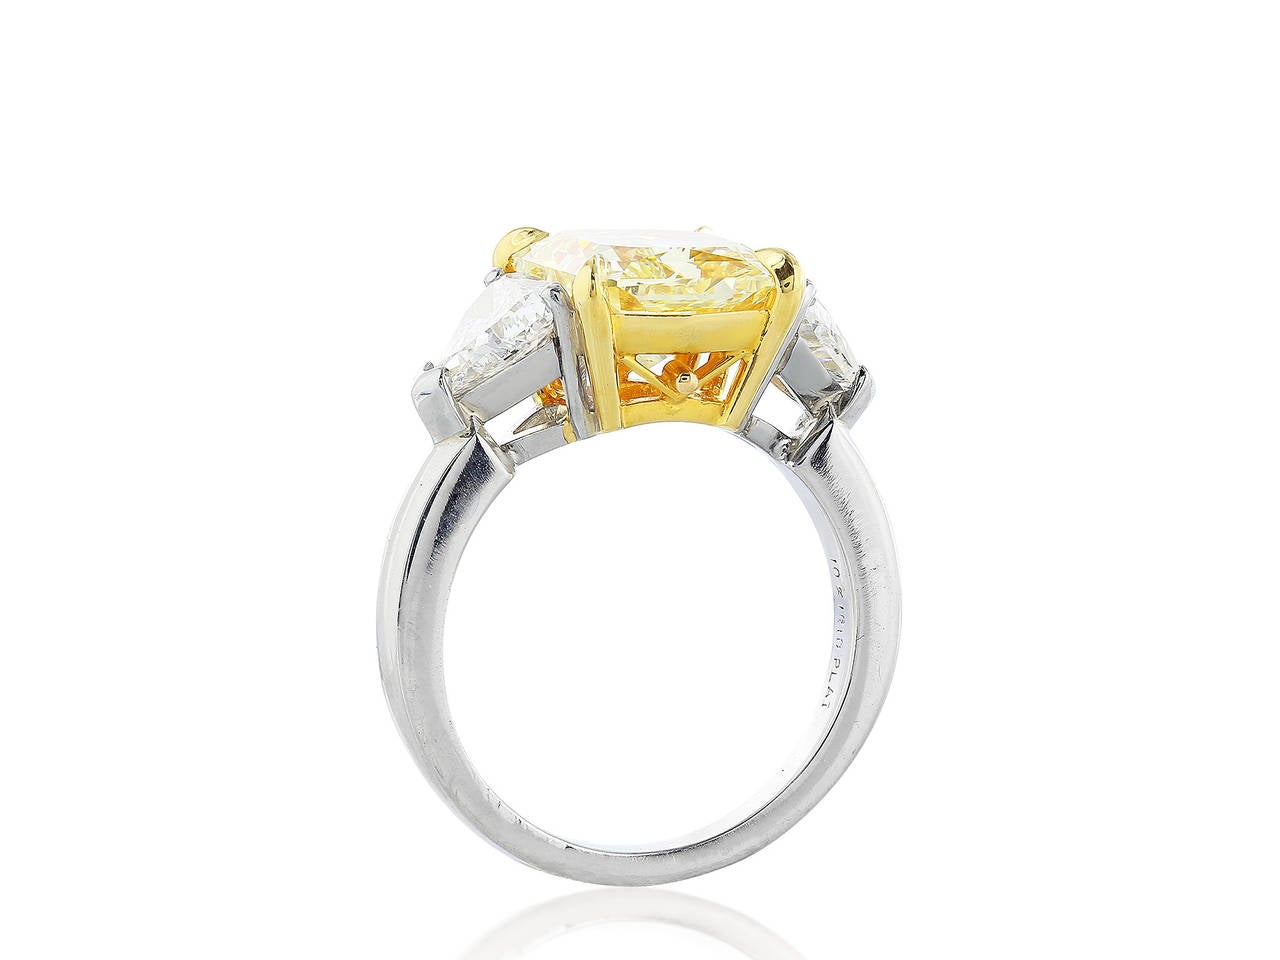 Contemporary 3.64 Carat Fancy Yellow Diamond Ring For Sale